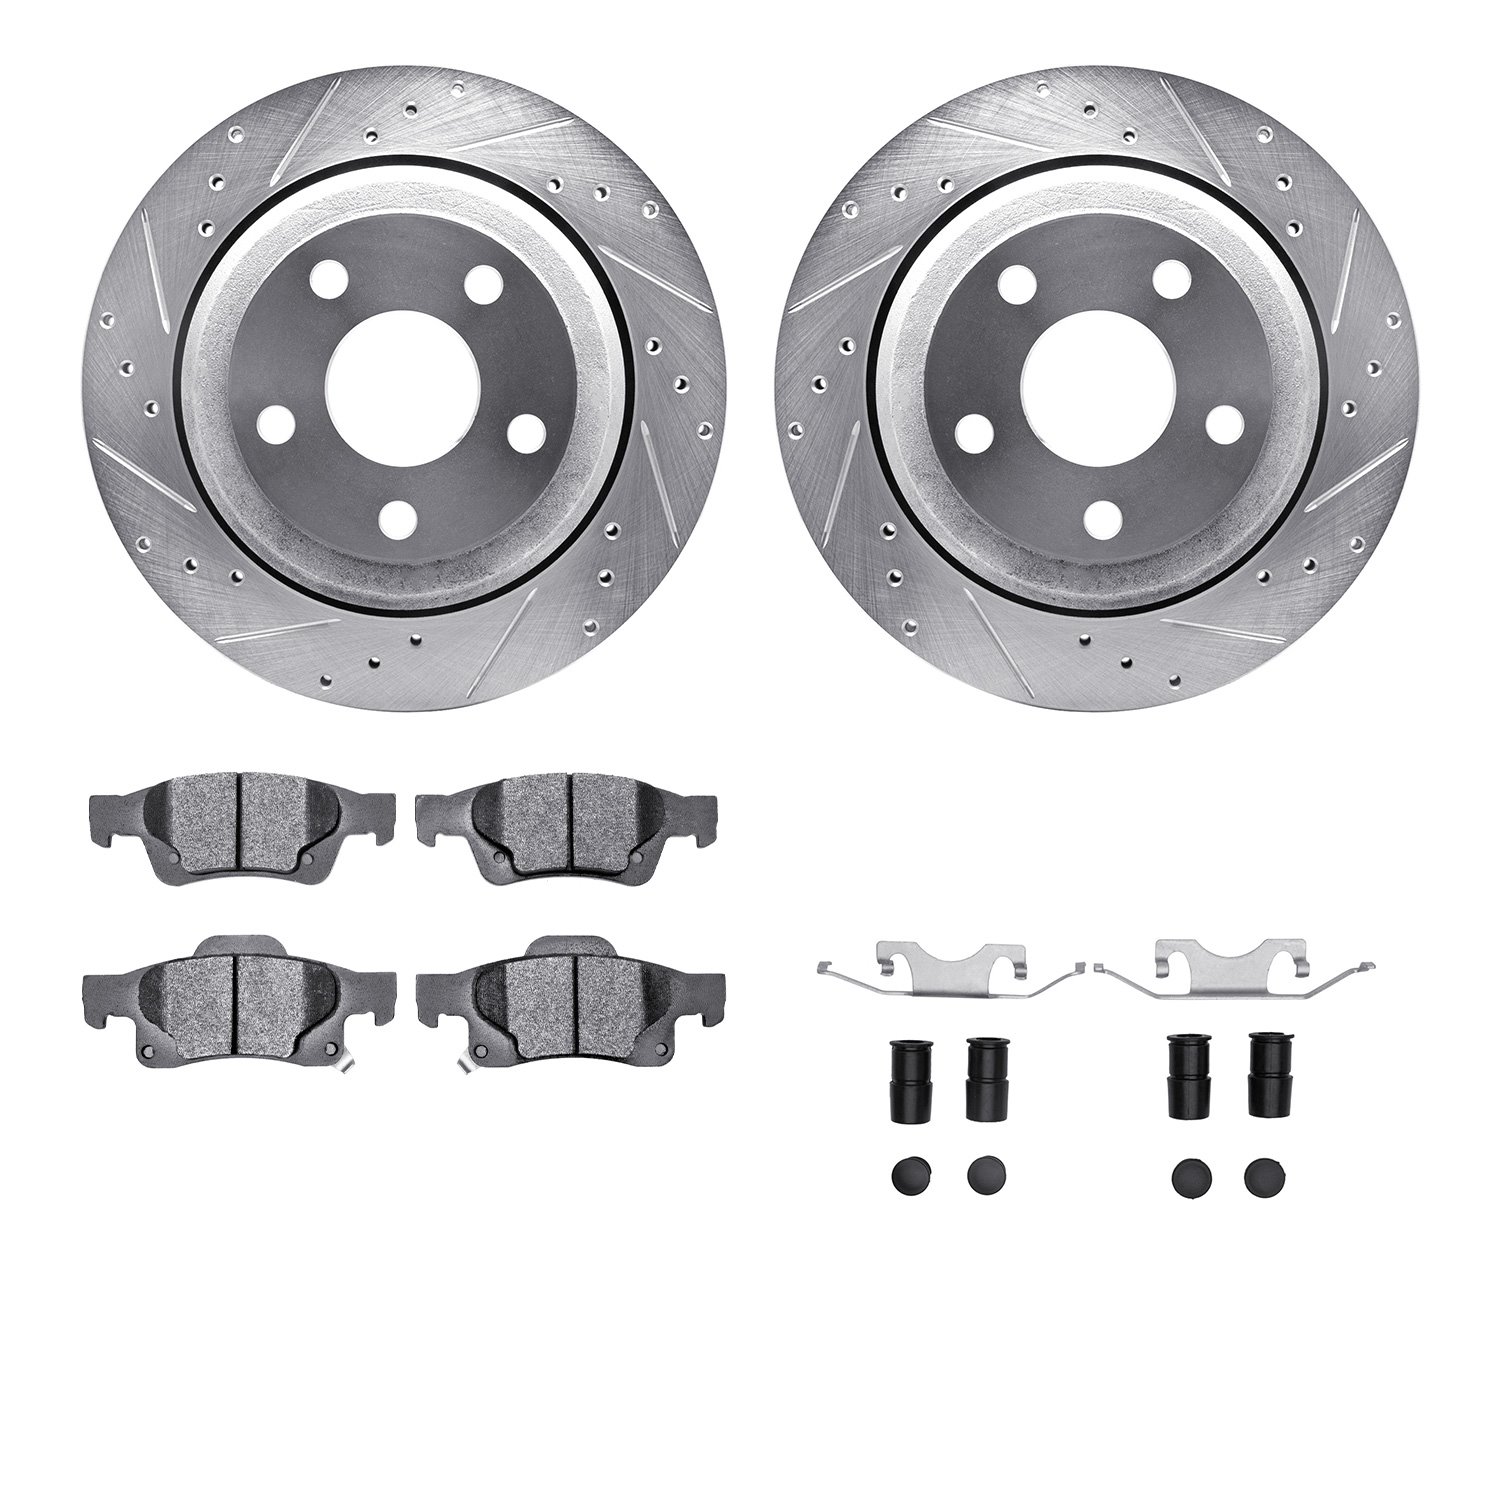 7412-42007 Drilled/Slotted Brake Rotors with Ultimate-Duty Brake Pads Kit & Hardware [Silver], Fits Select Mopar, Position: Rear